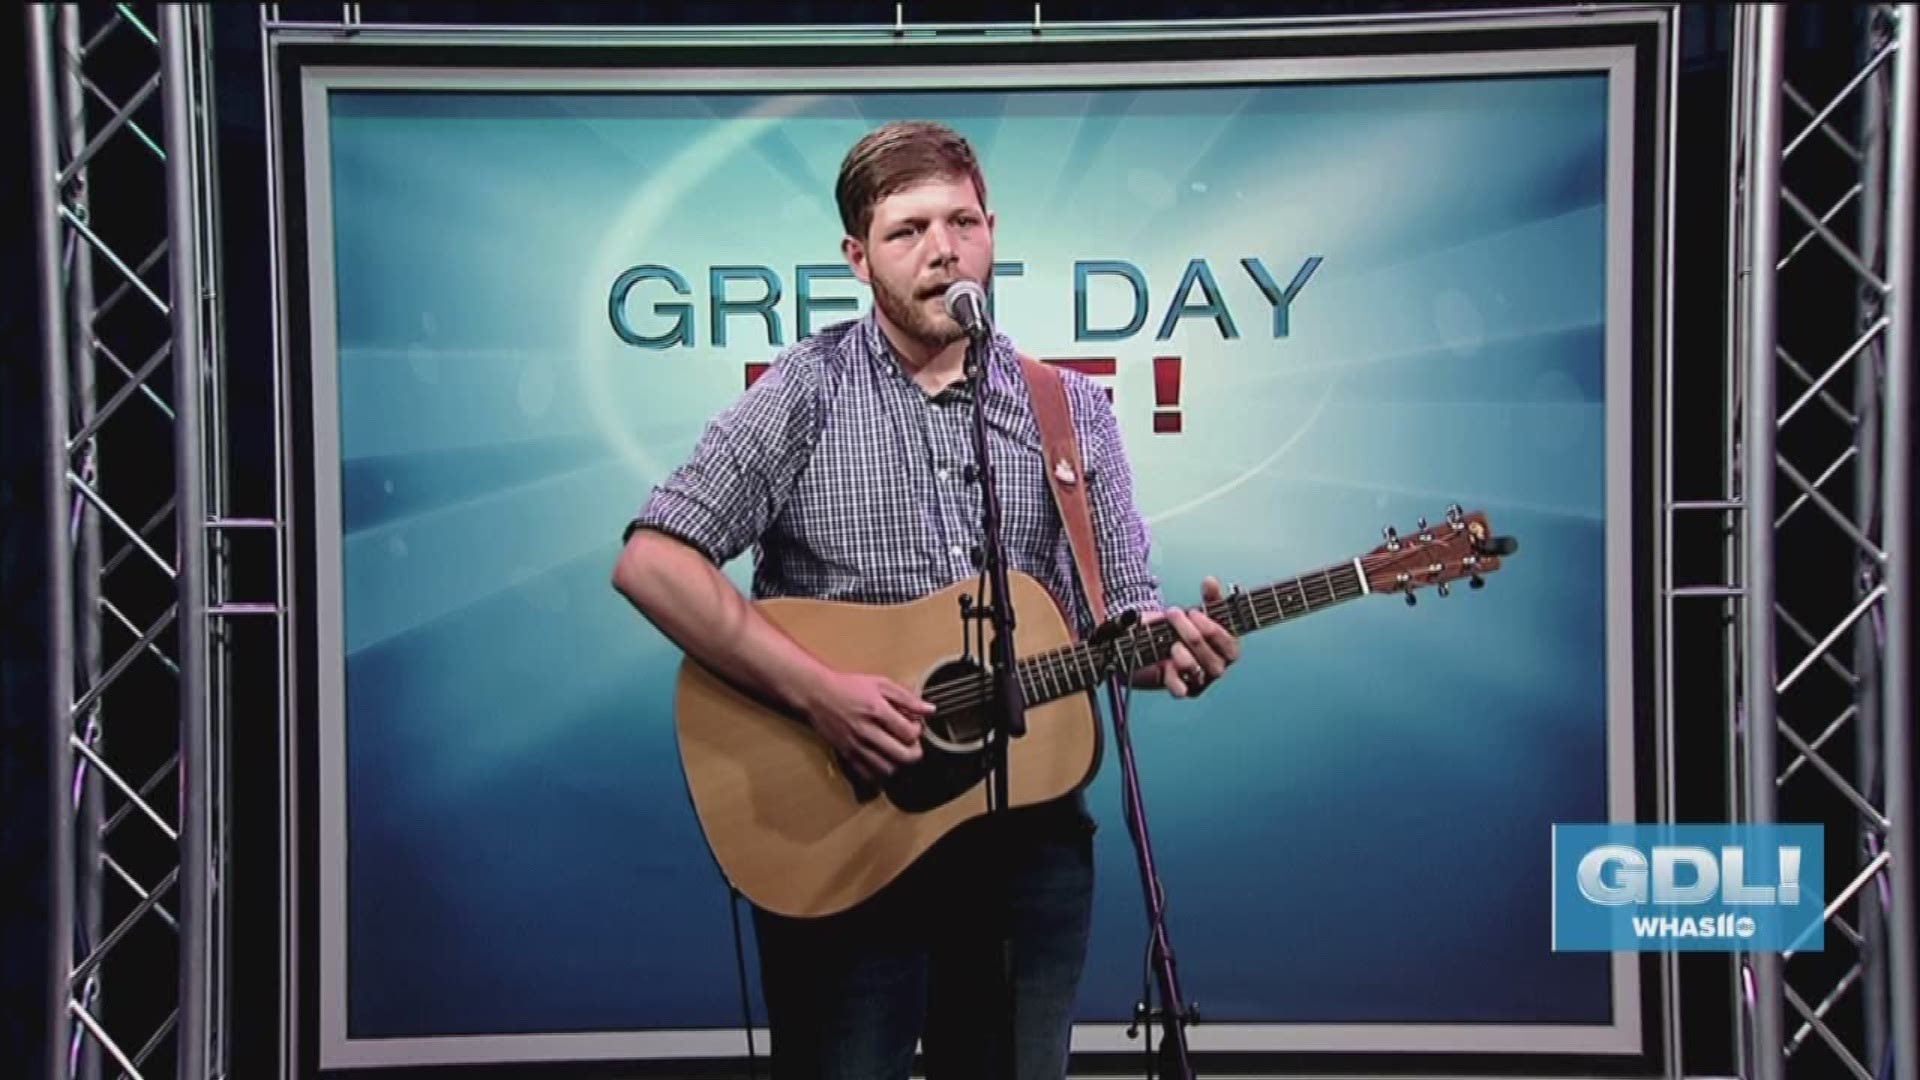 Ethan Coomer stopped by Great Day Live to perform a John Prine song and talk about The Prine Time Tribute on Sunday, April 28, 2019 at Lettersong, which is located at 1501 Story Avenue in Louisville, KY.